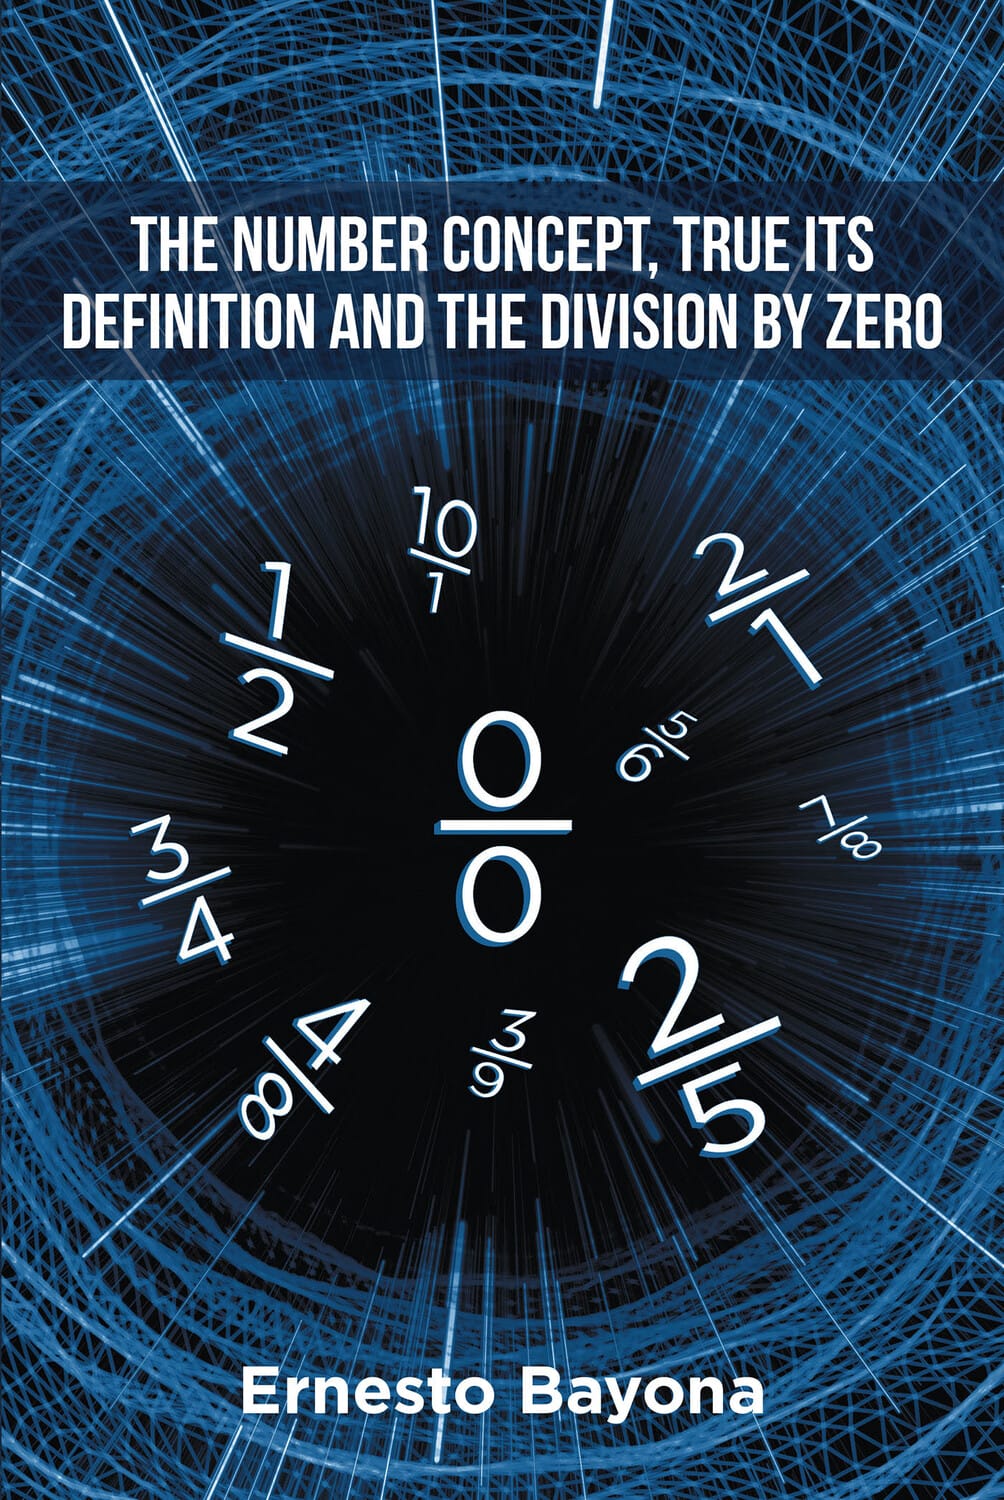 'The Number Concept, True its Definition and The Division by Zero', by Ernesto Bayona